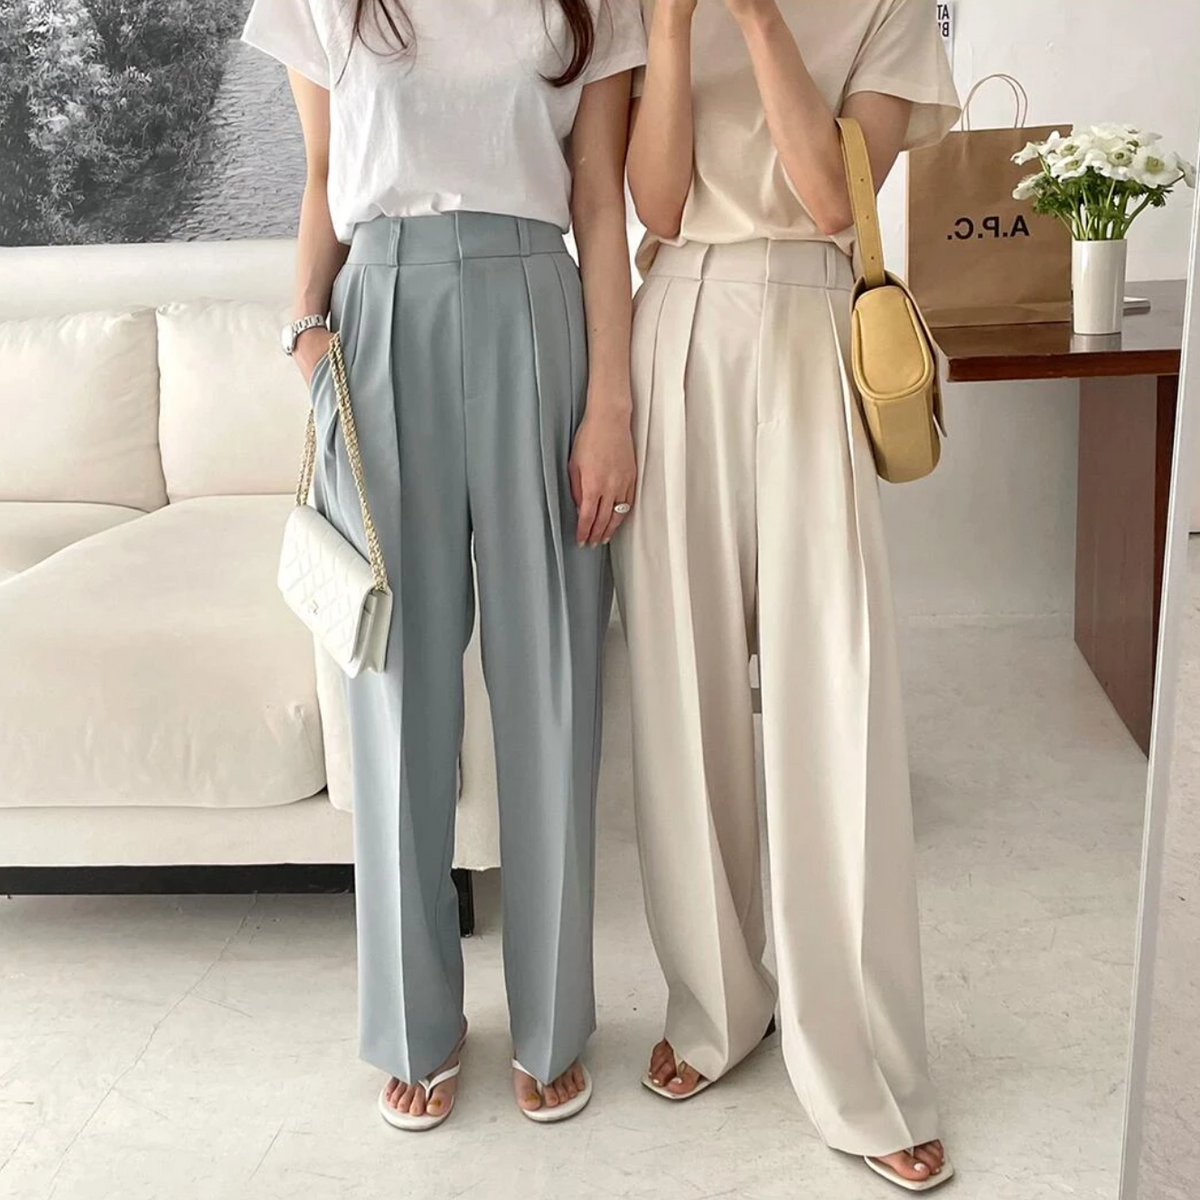 Simplee Solid high waist office lady trousers Loose casual apricot summer women  pants High street style Harlan pleated trousers 1026-1